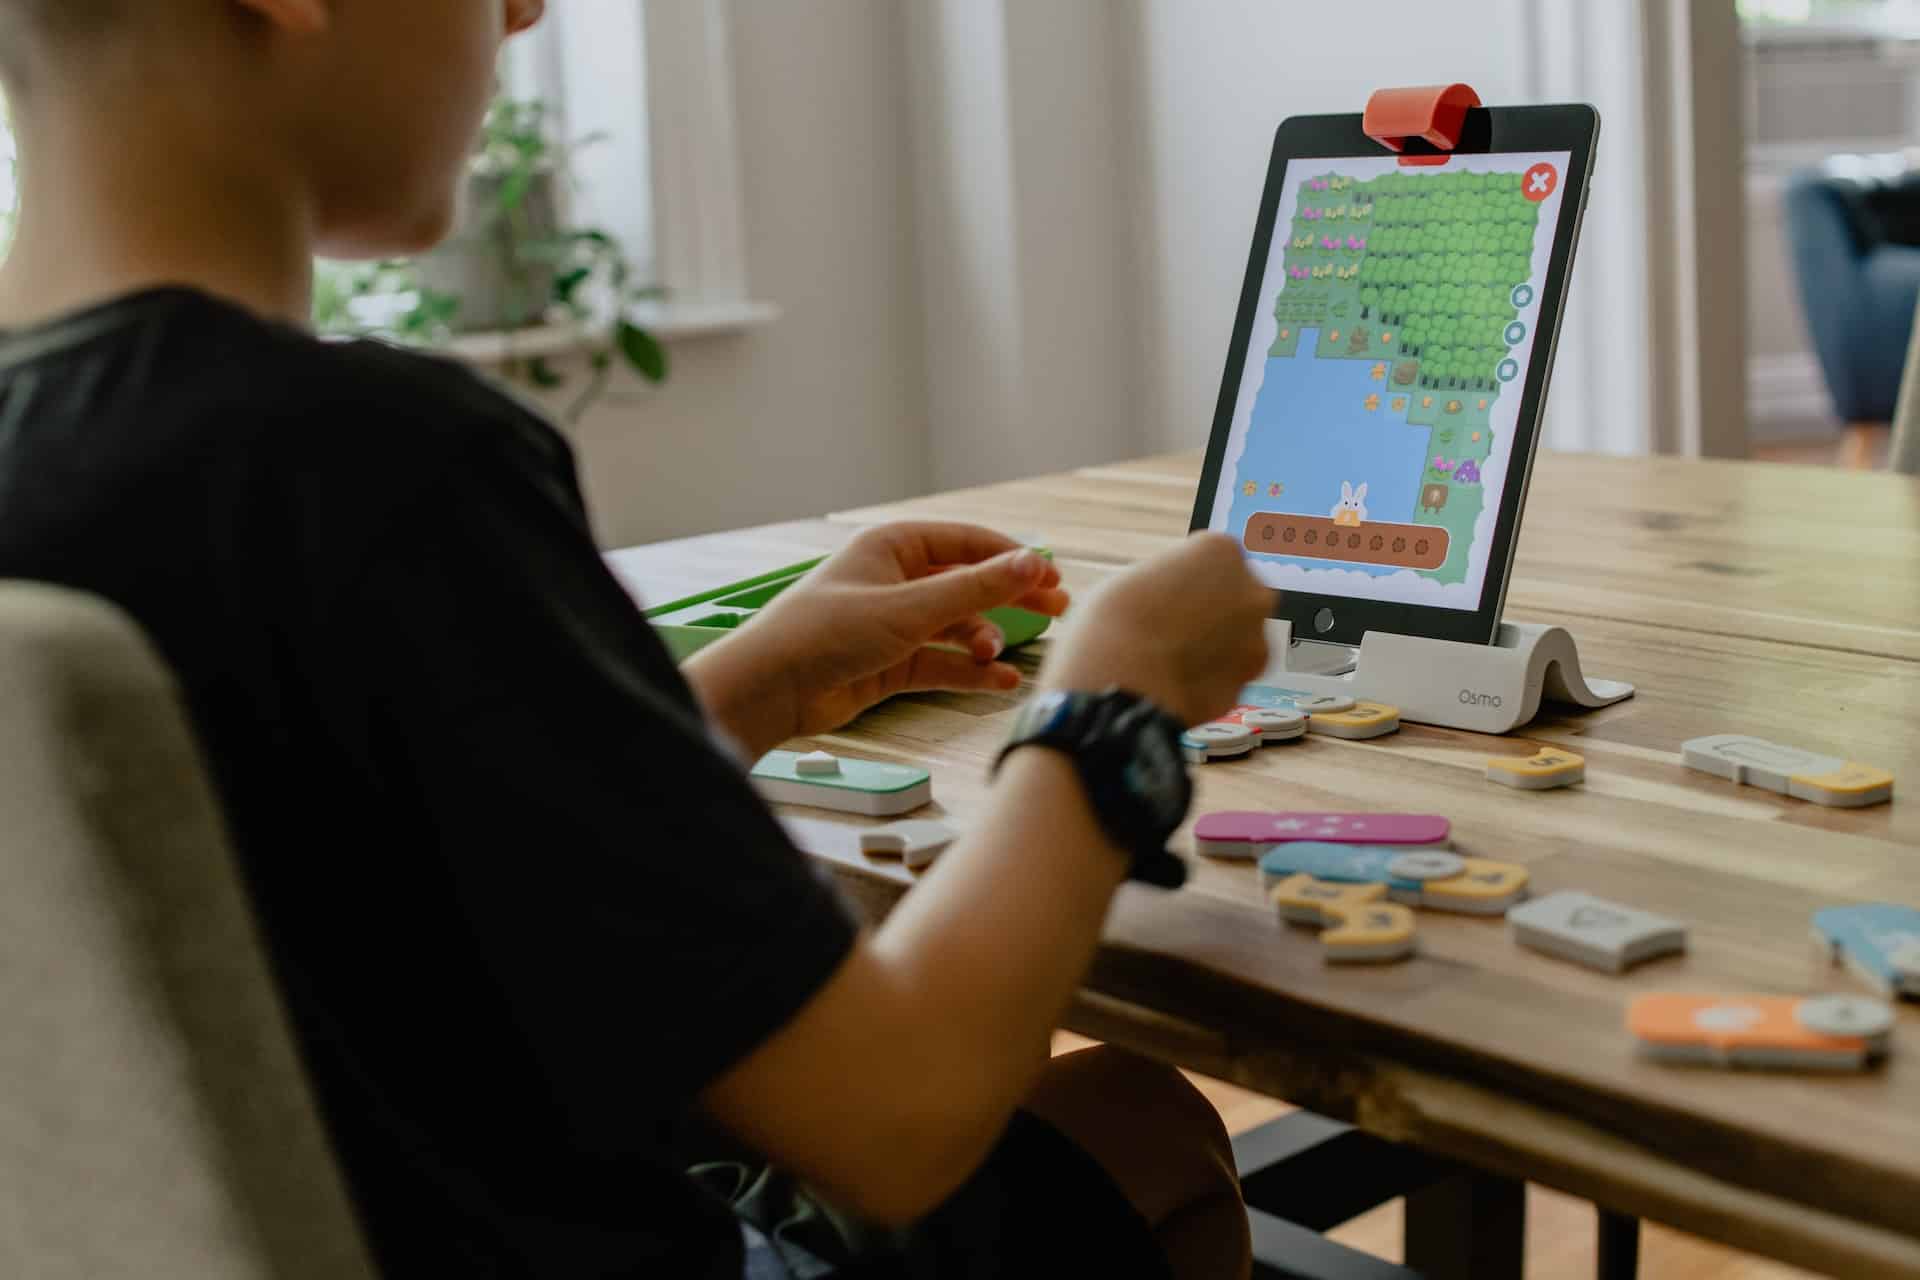 The Top 20 STEM Toys To Spark Young Coders’ Imagination